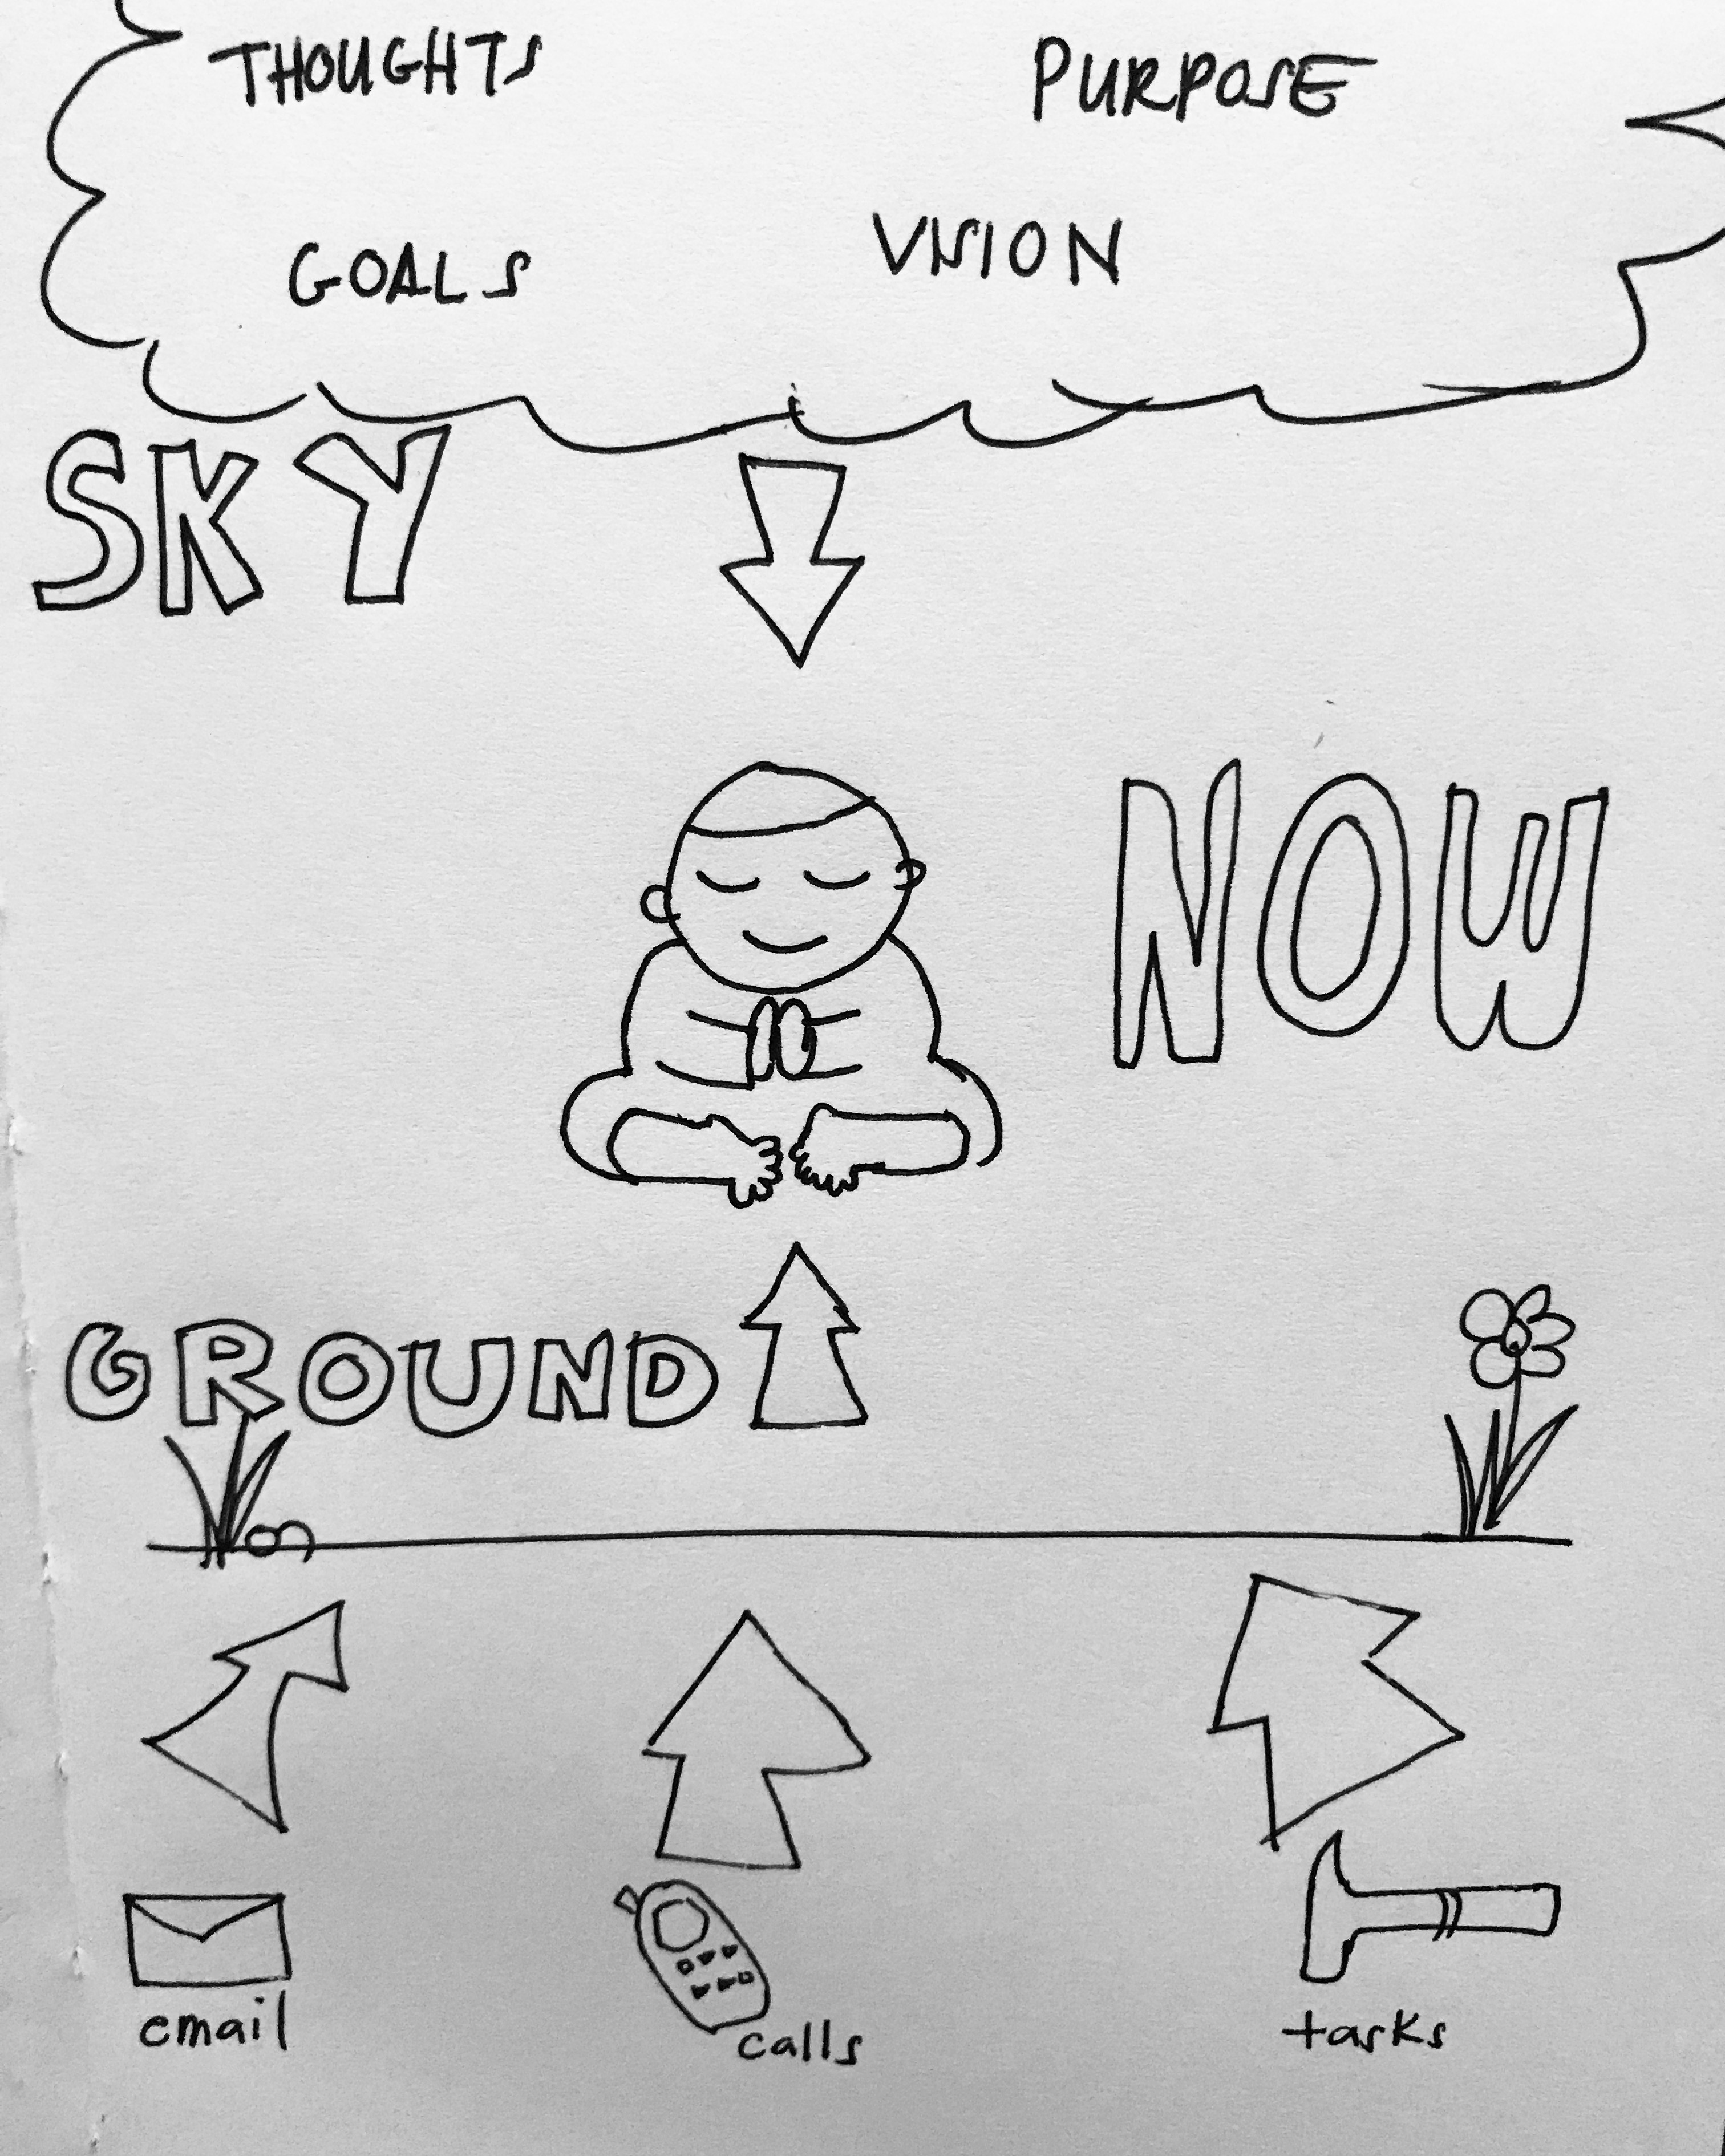 Sky, now, and ground